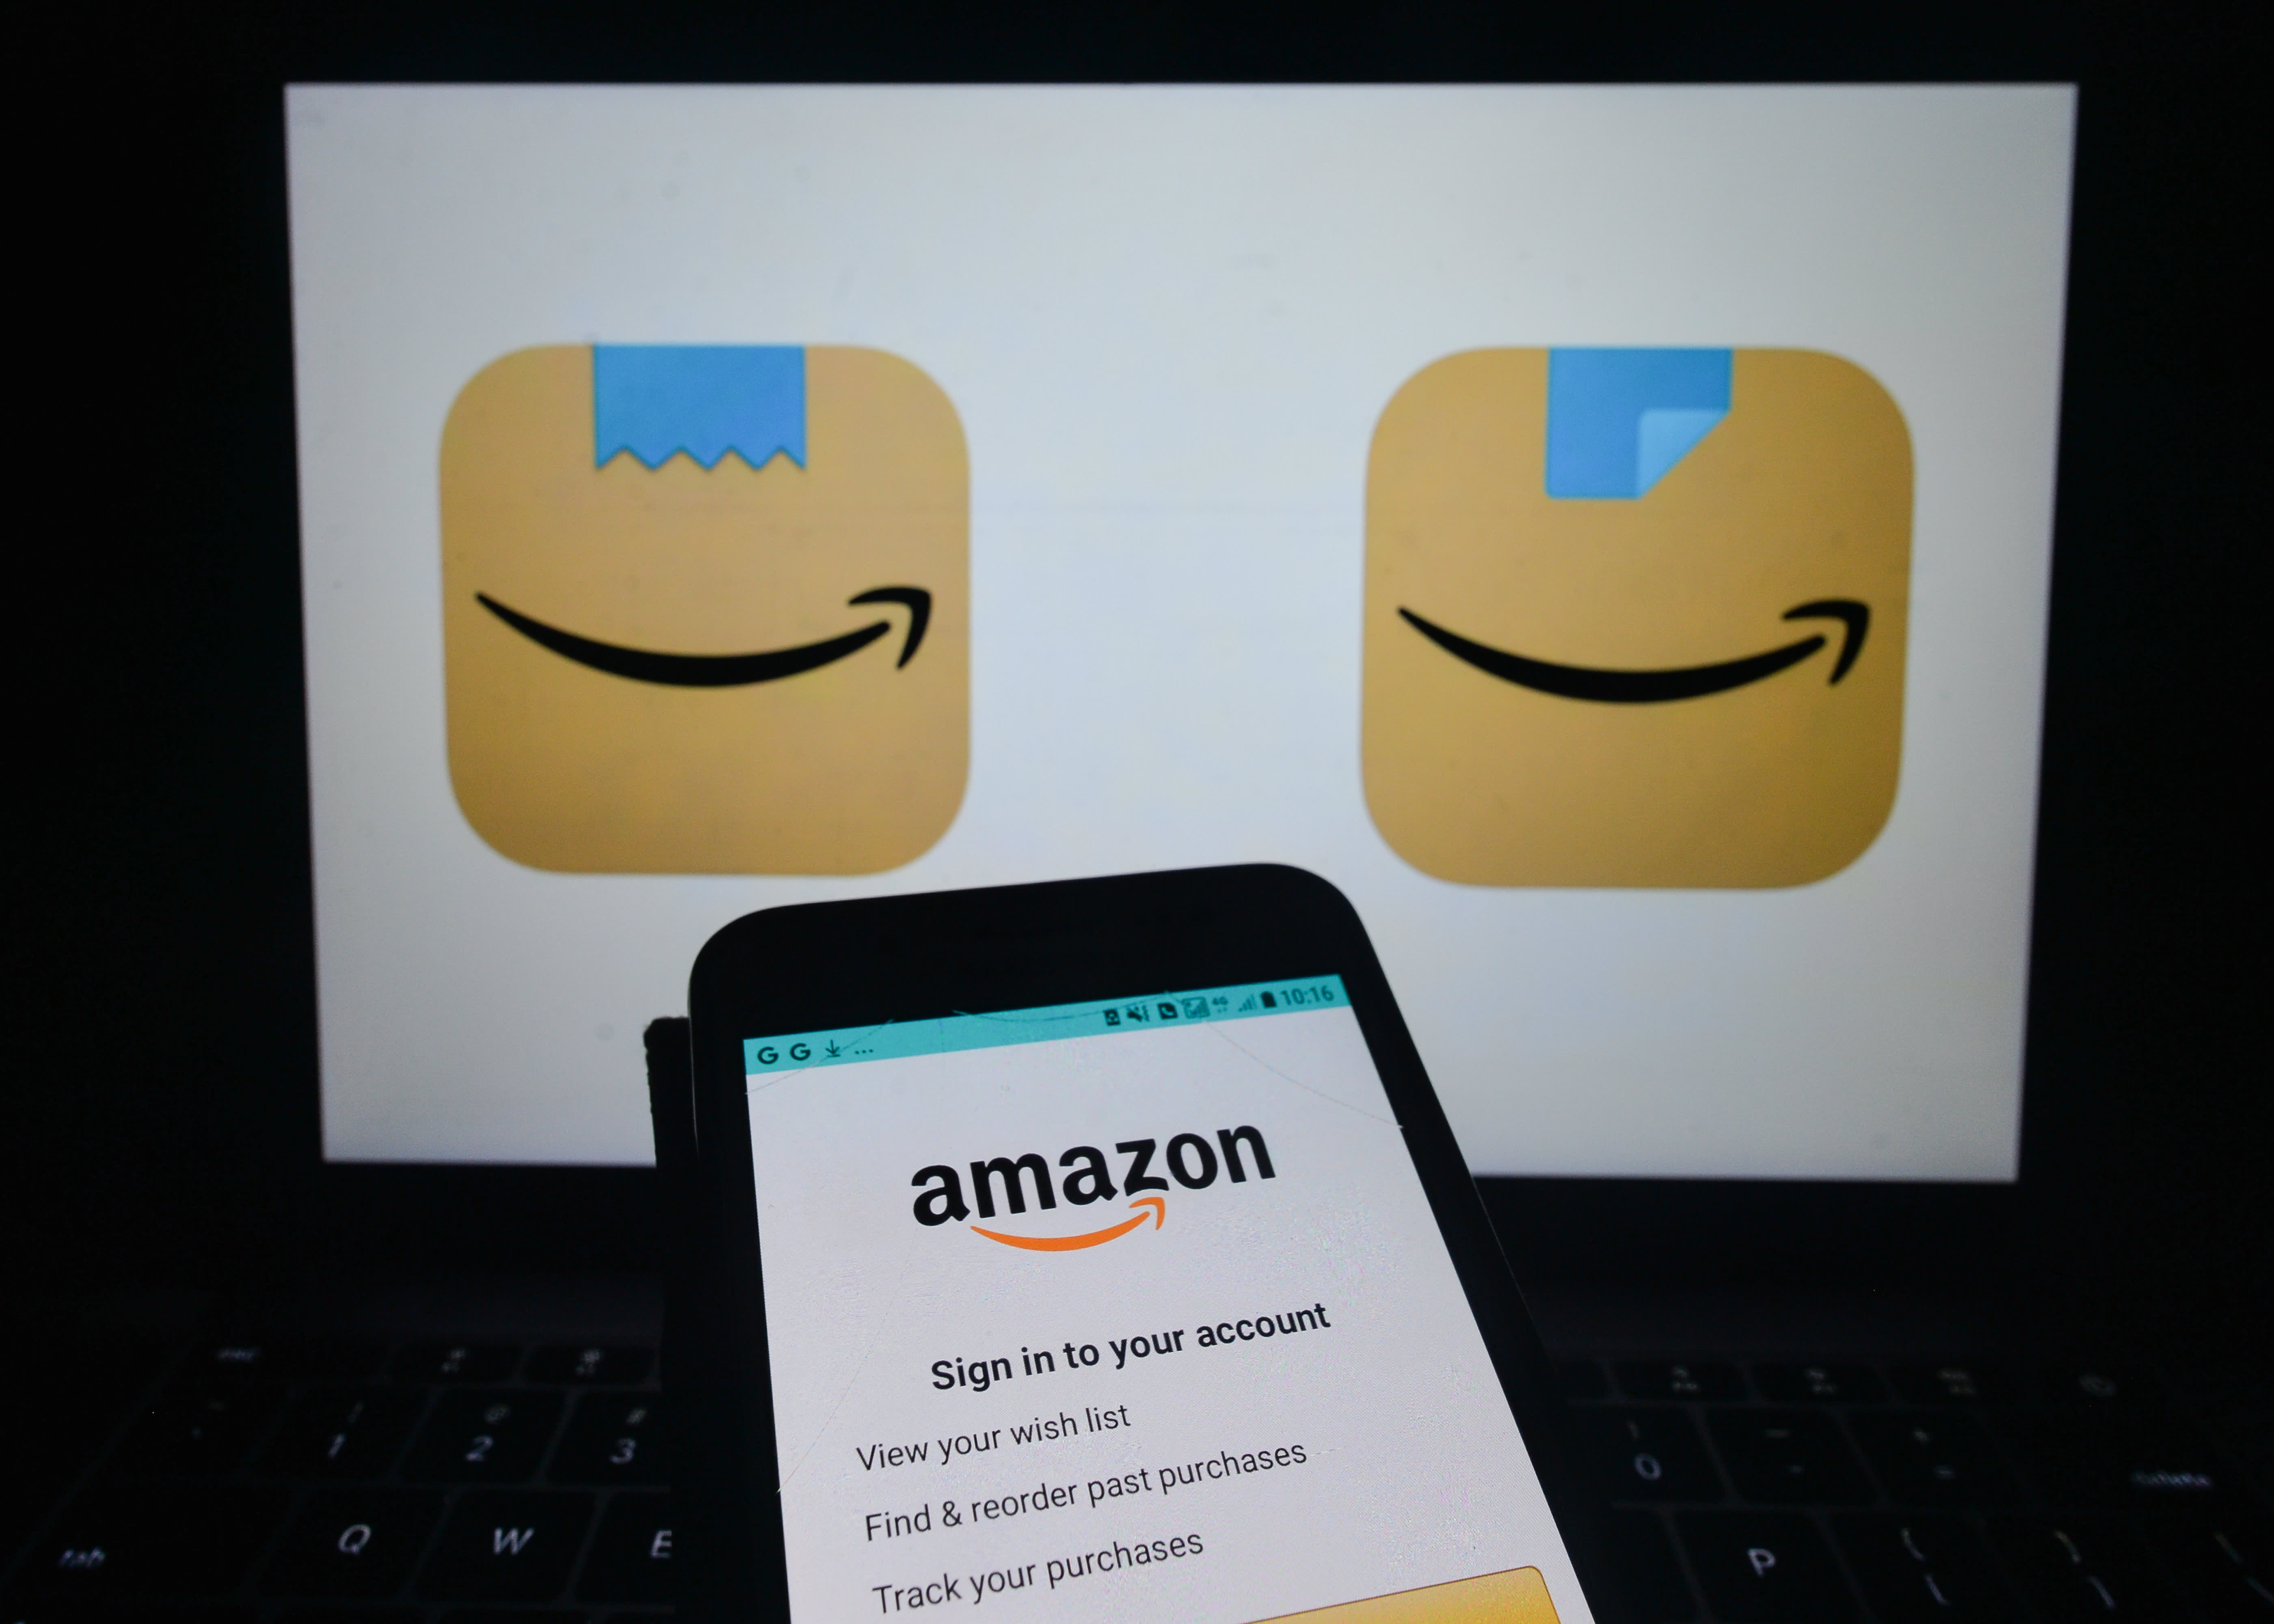 How Apple's latest iOS update could help Amazon's growing ad business